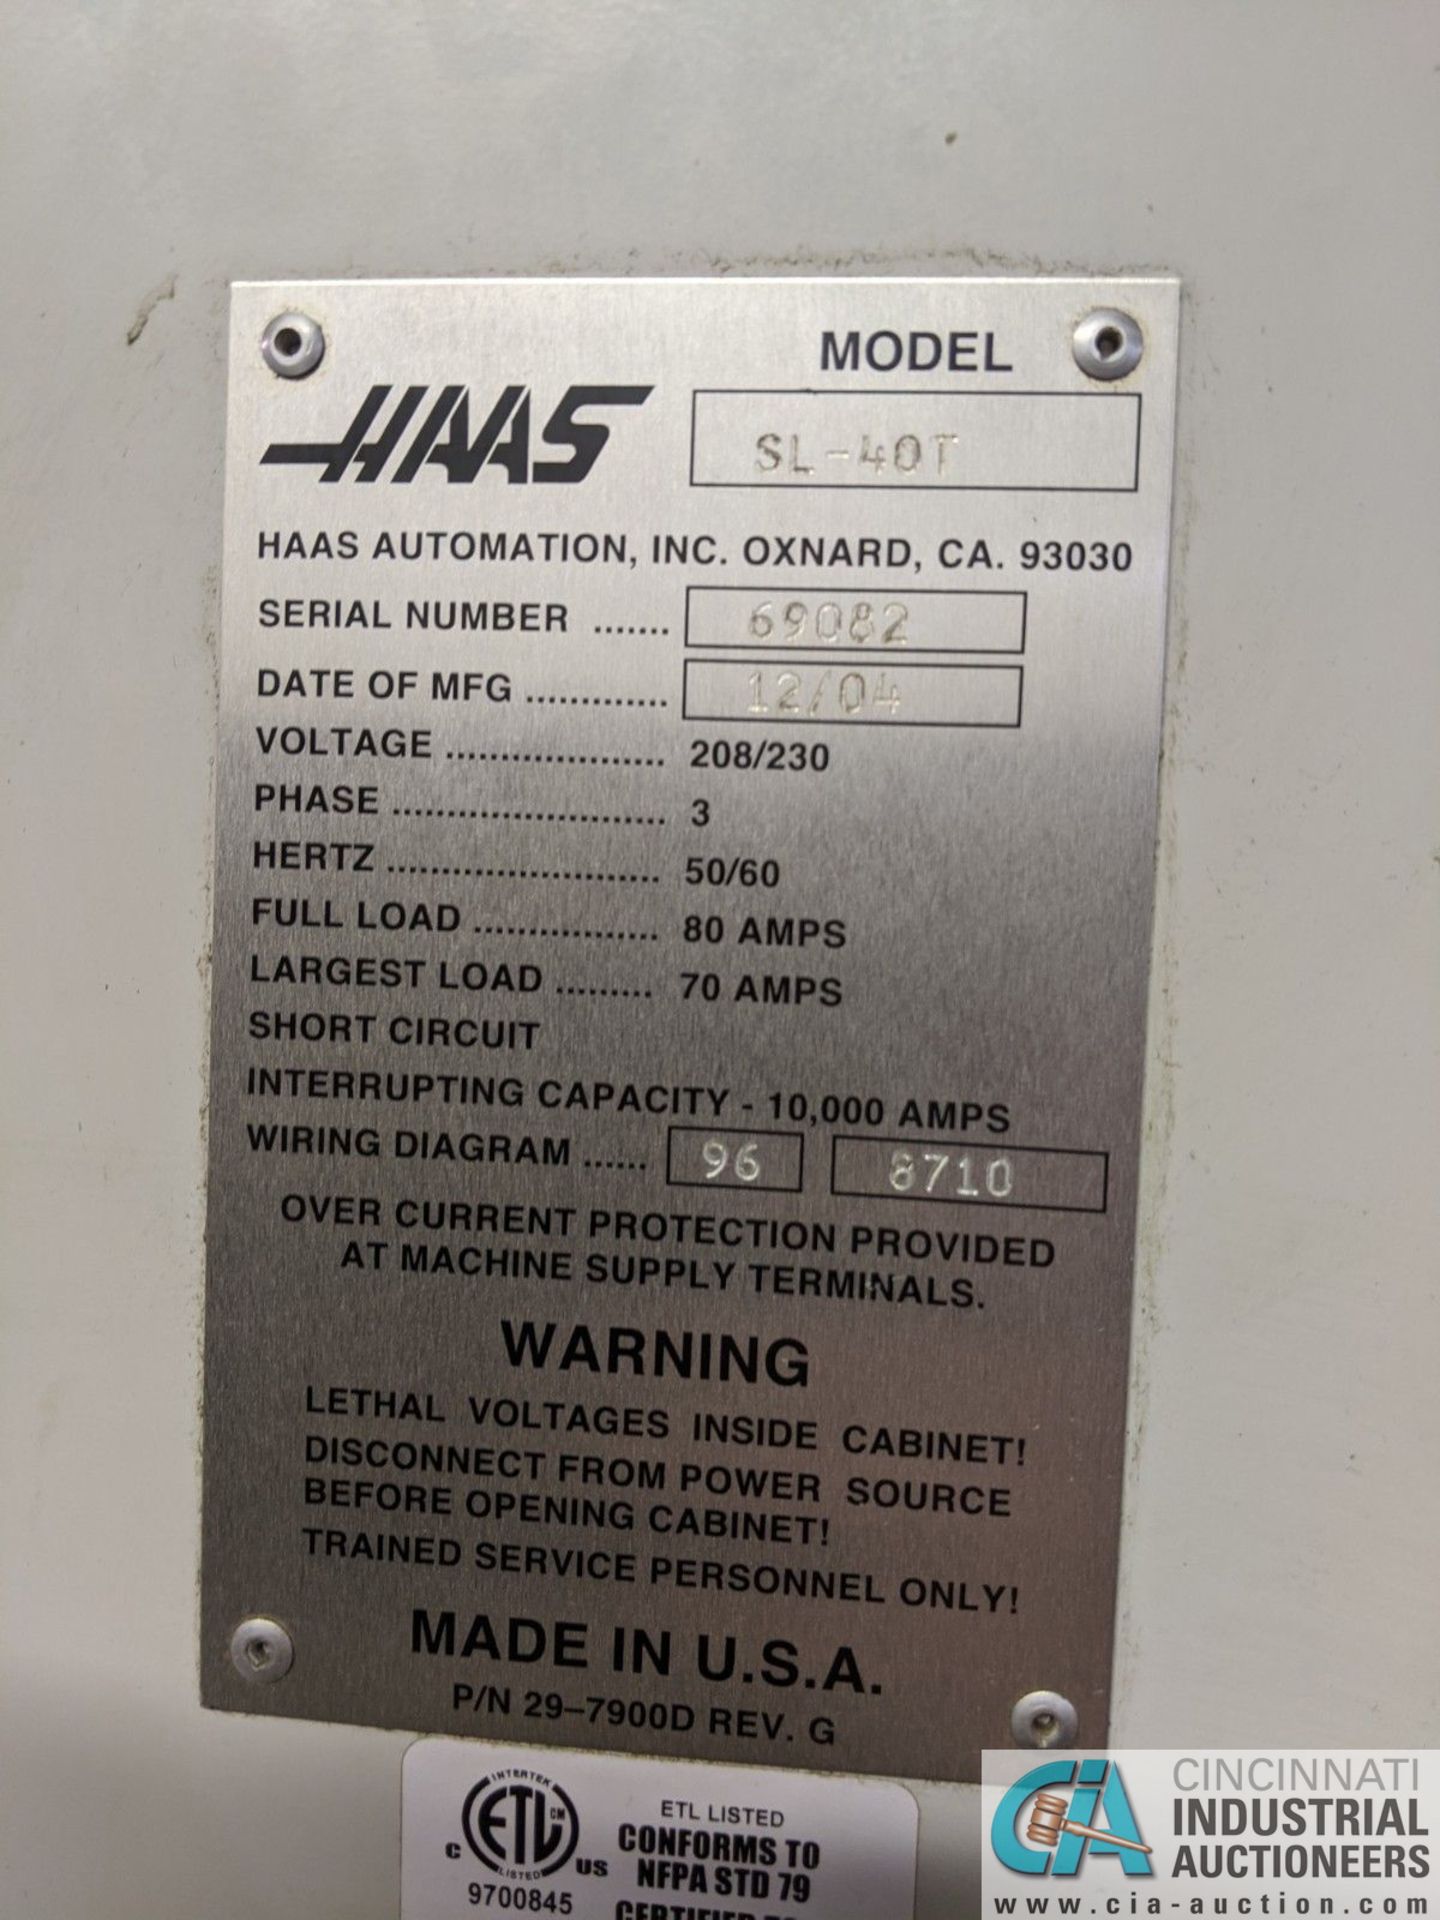 HAAS MODEL SL-40T CNC TURNING CENTER; S/N 69082, 18" 3-JAW CHUCK, 10 POSITION TURRET, TAILSTOCK, - Image 7 of 14